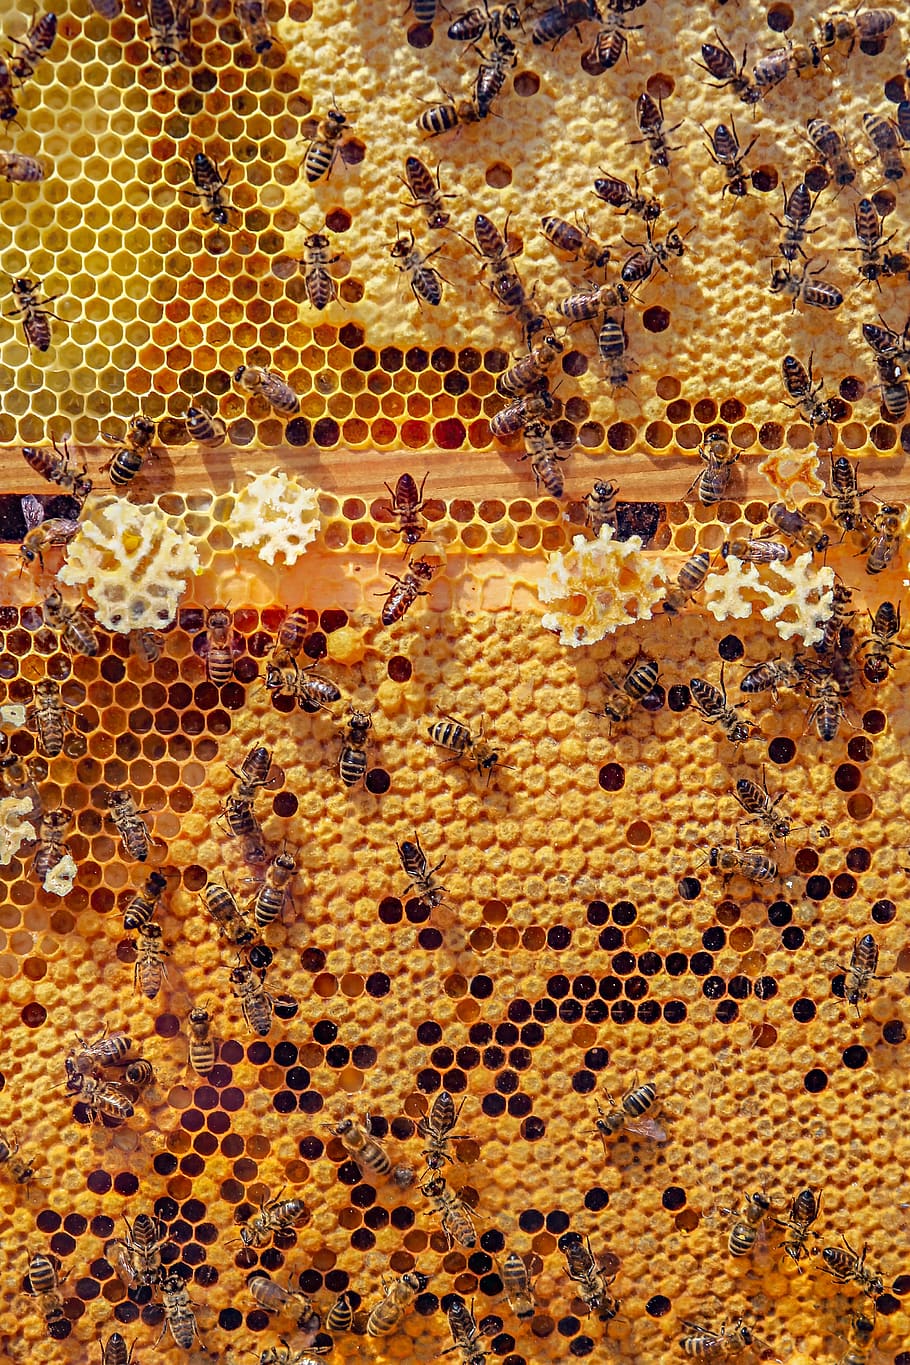 bees, nature, animals, honeycomb, honey bee, insect, close up